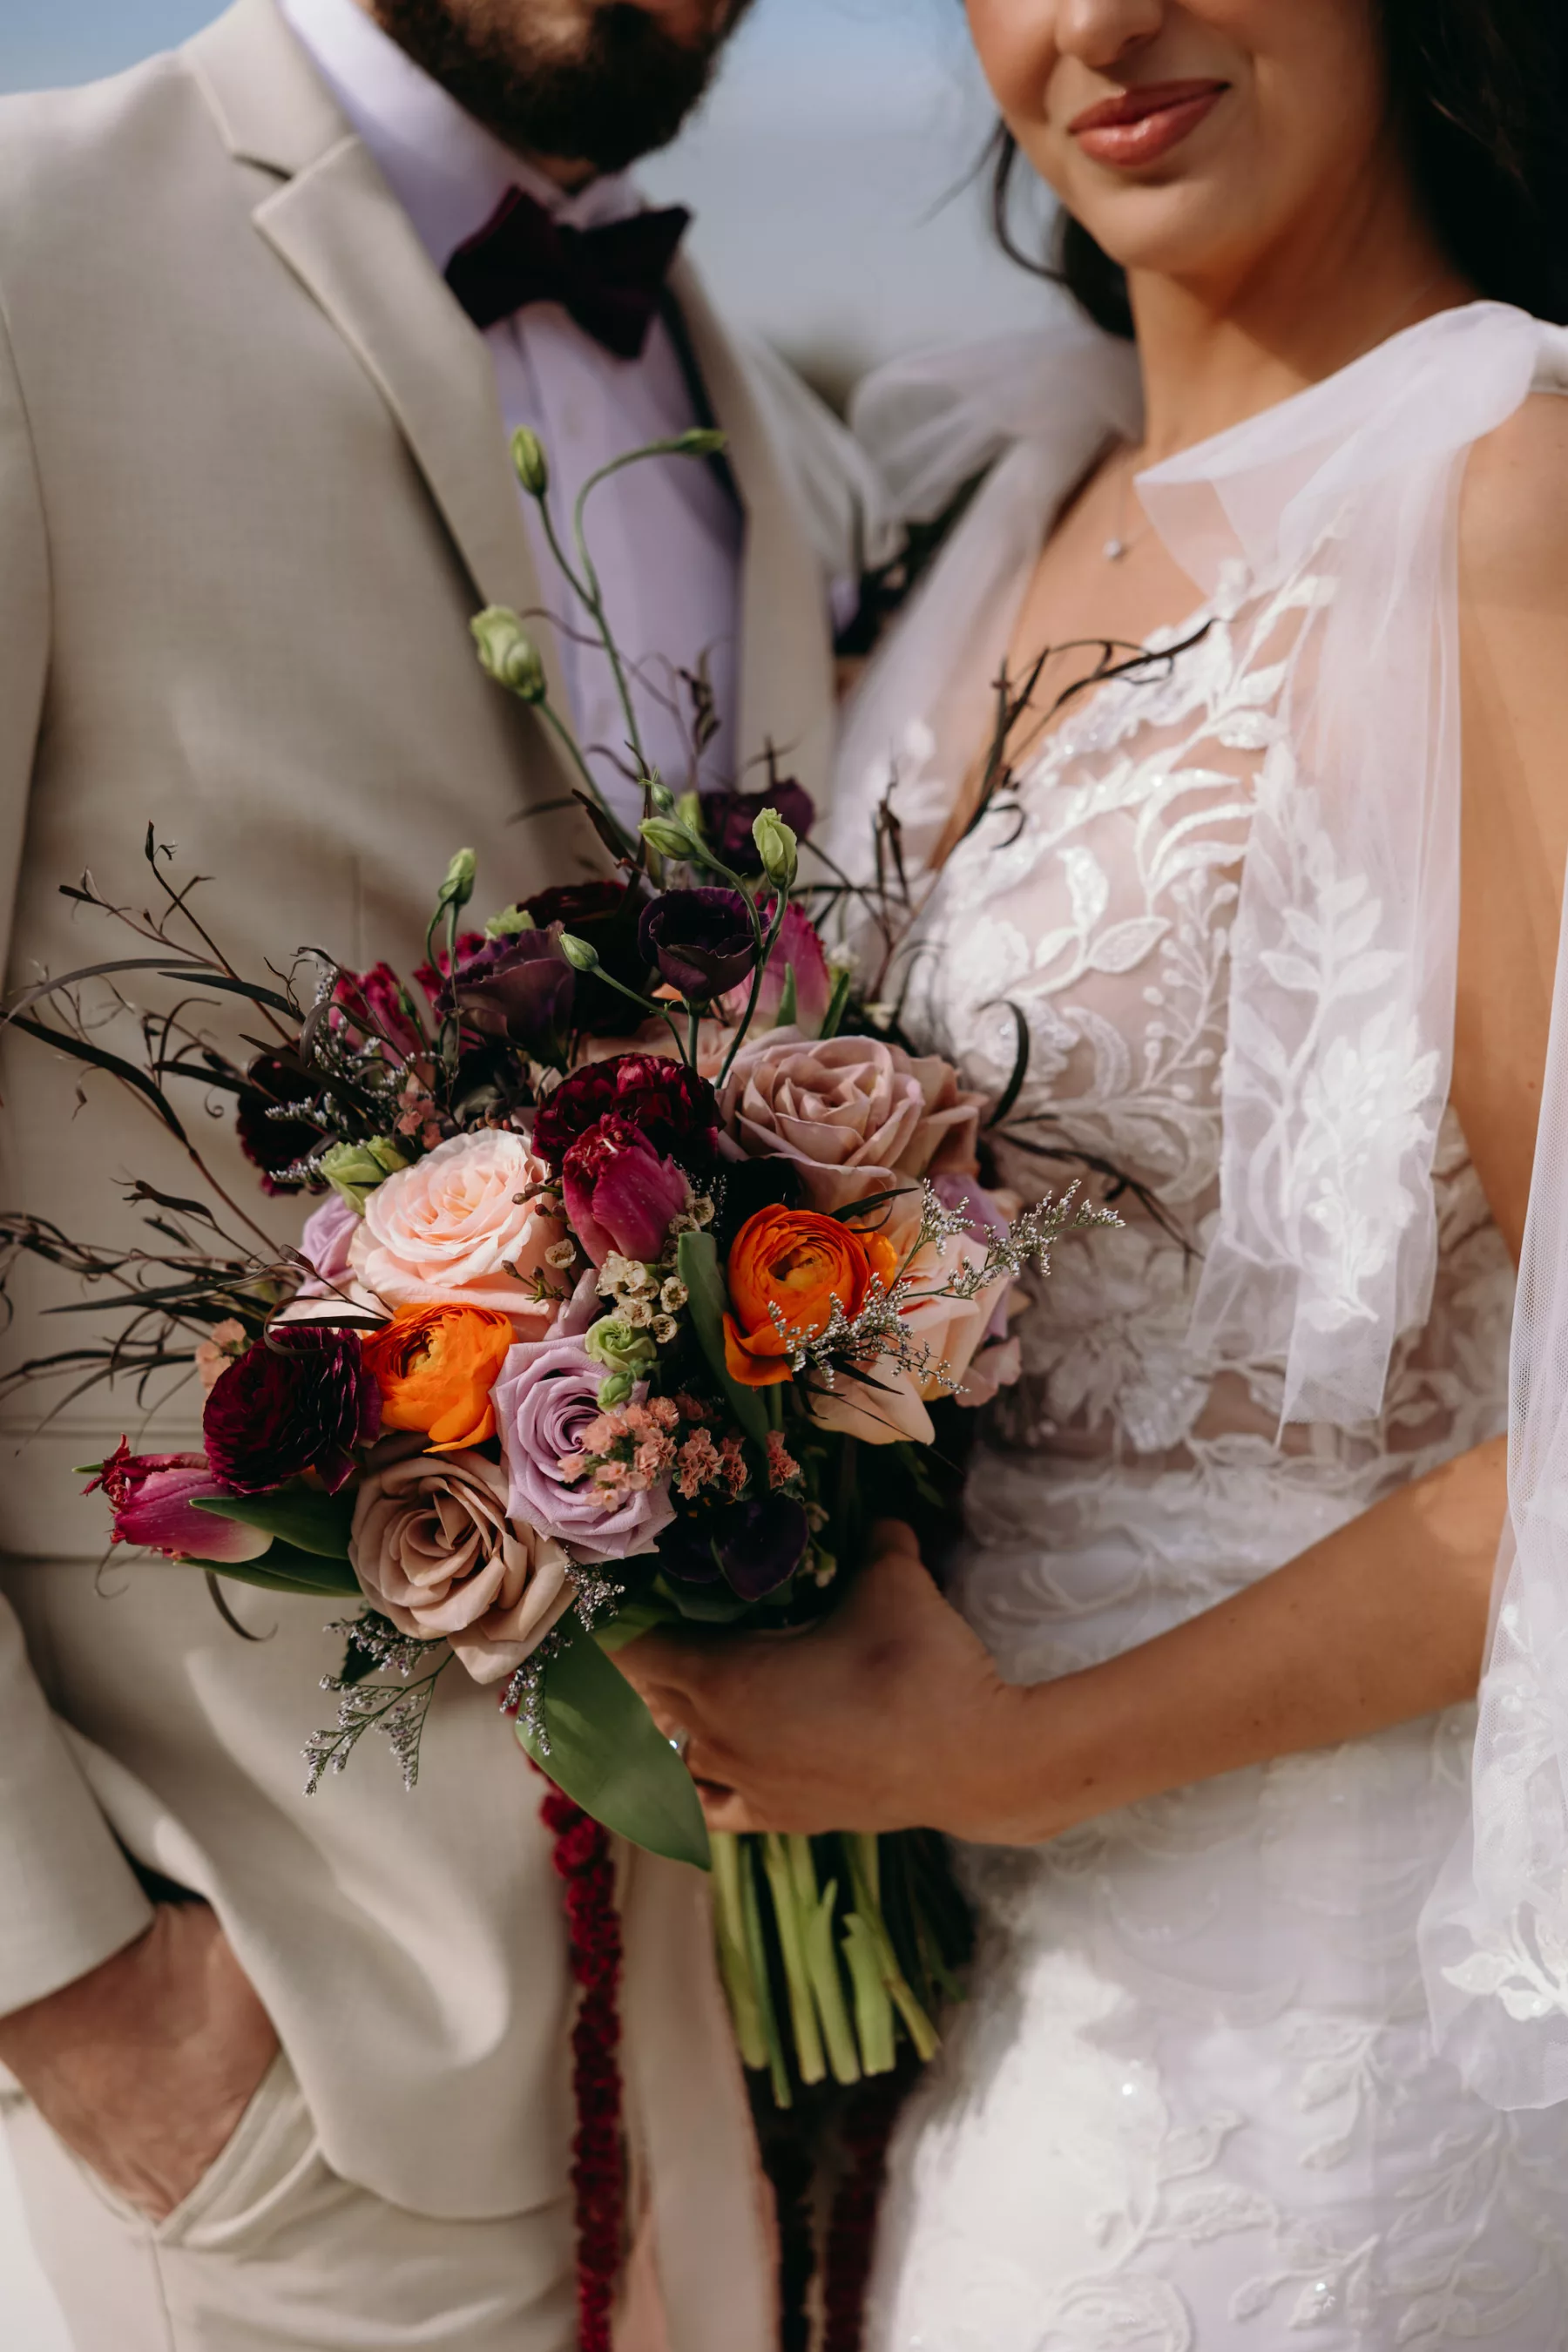 Whimsical Purple and Orange Roses, Brown Amaranthus, Pink Tulips, Wax Flowers, and Greenery Fall Wedding Bouquet | Tampa Bay Florist Save The Date Florida